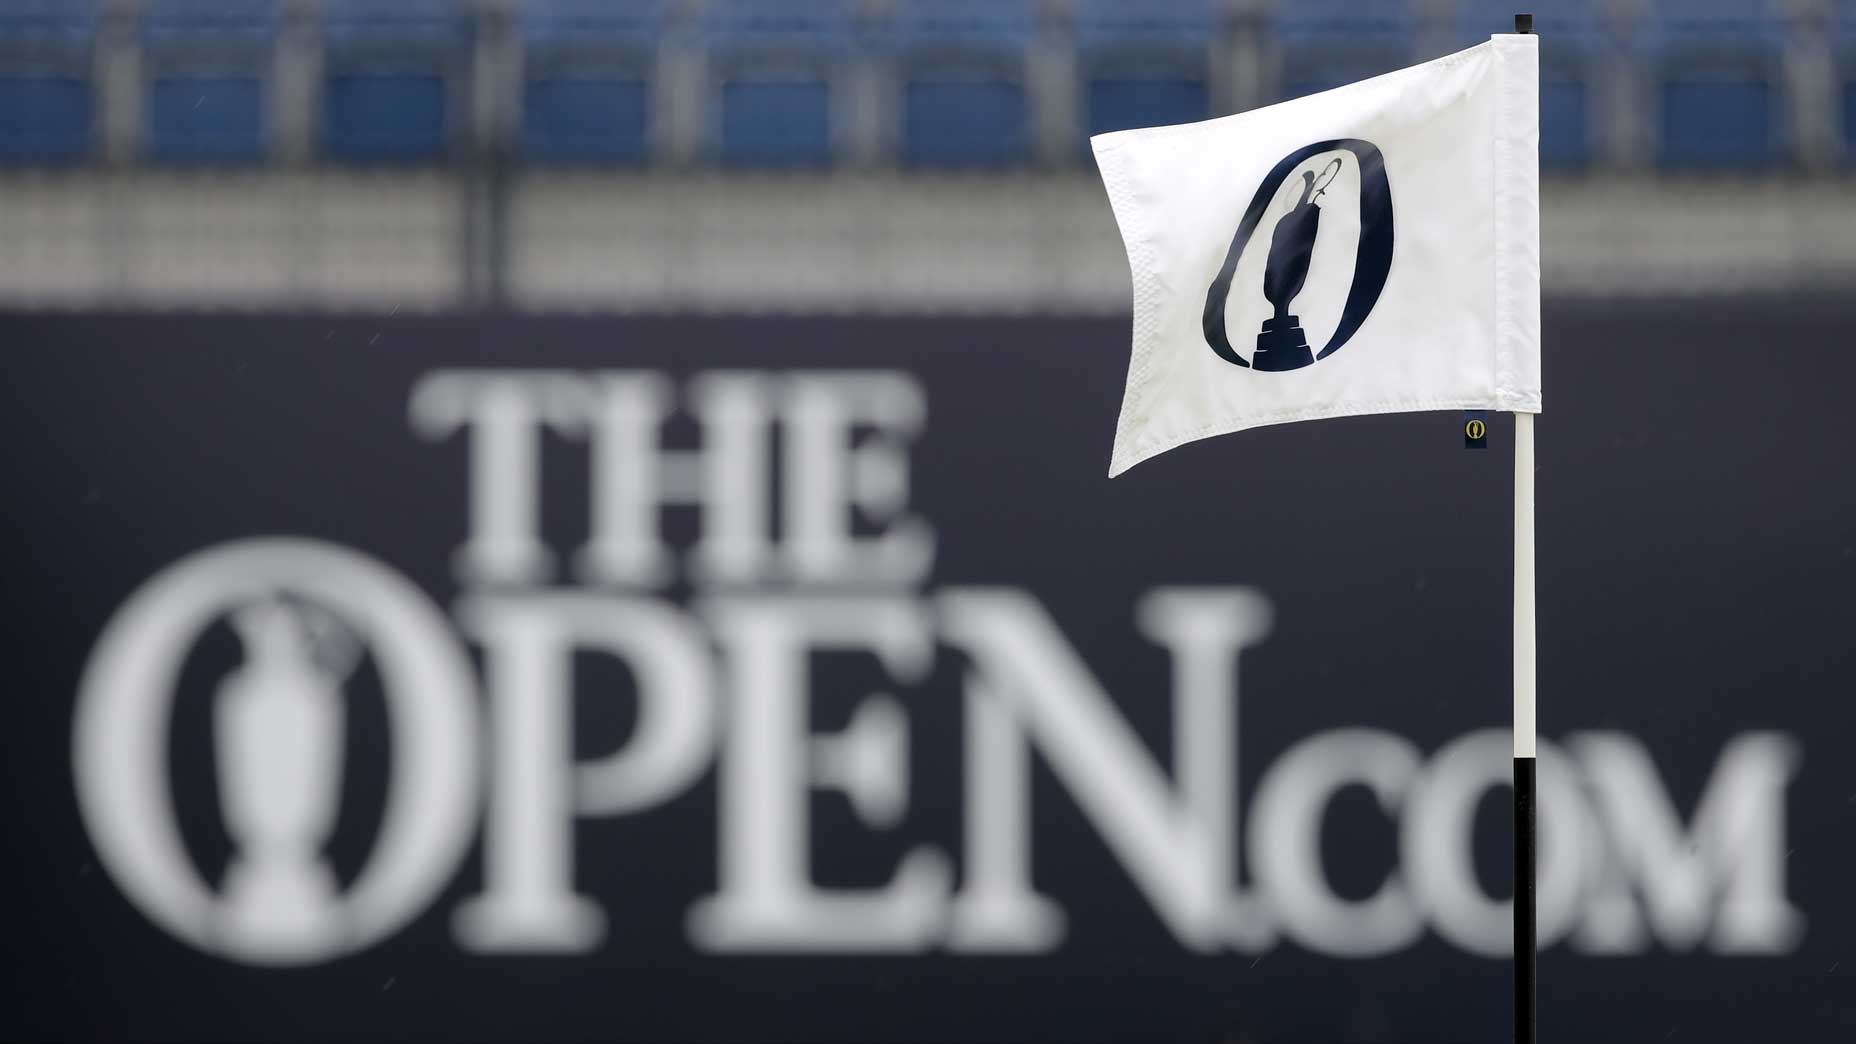 The Open 